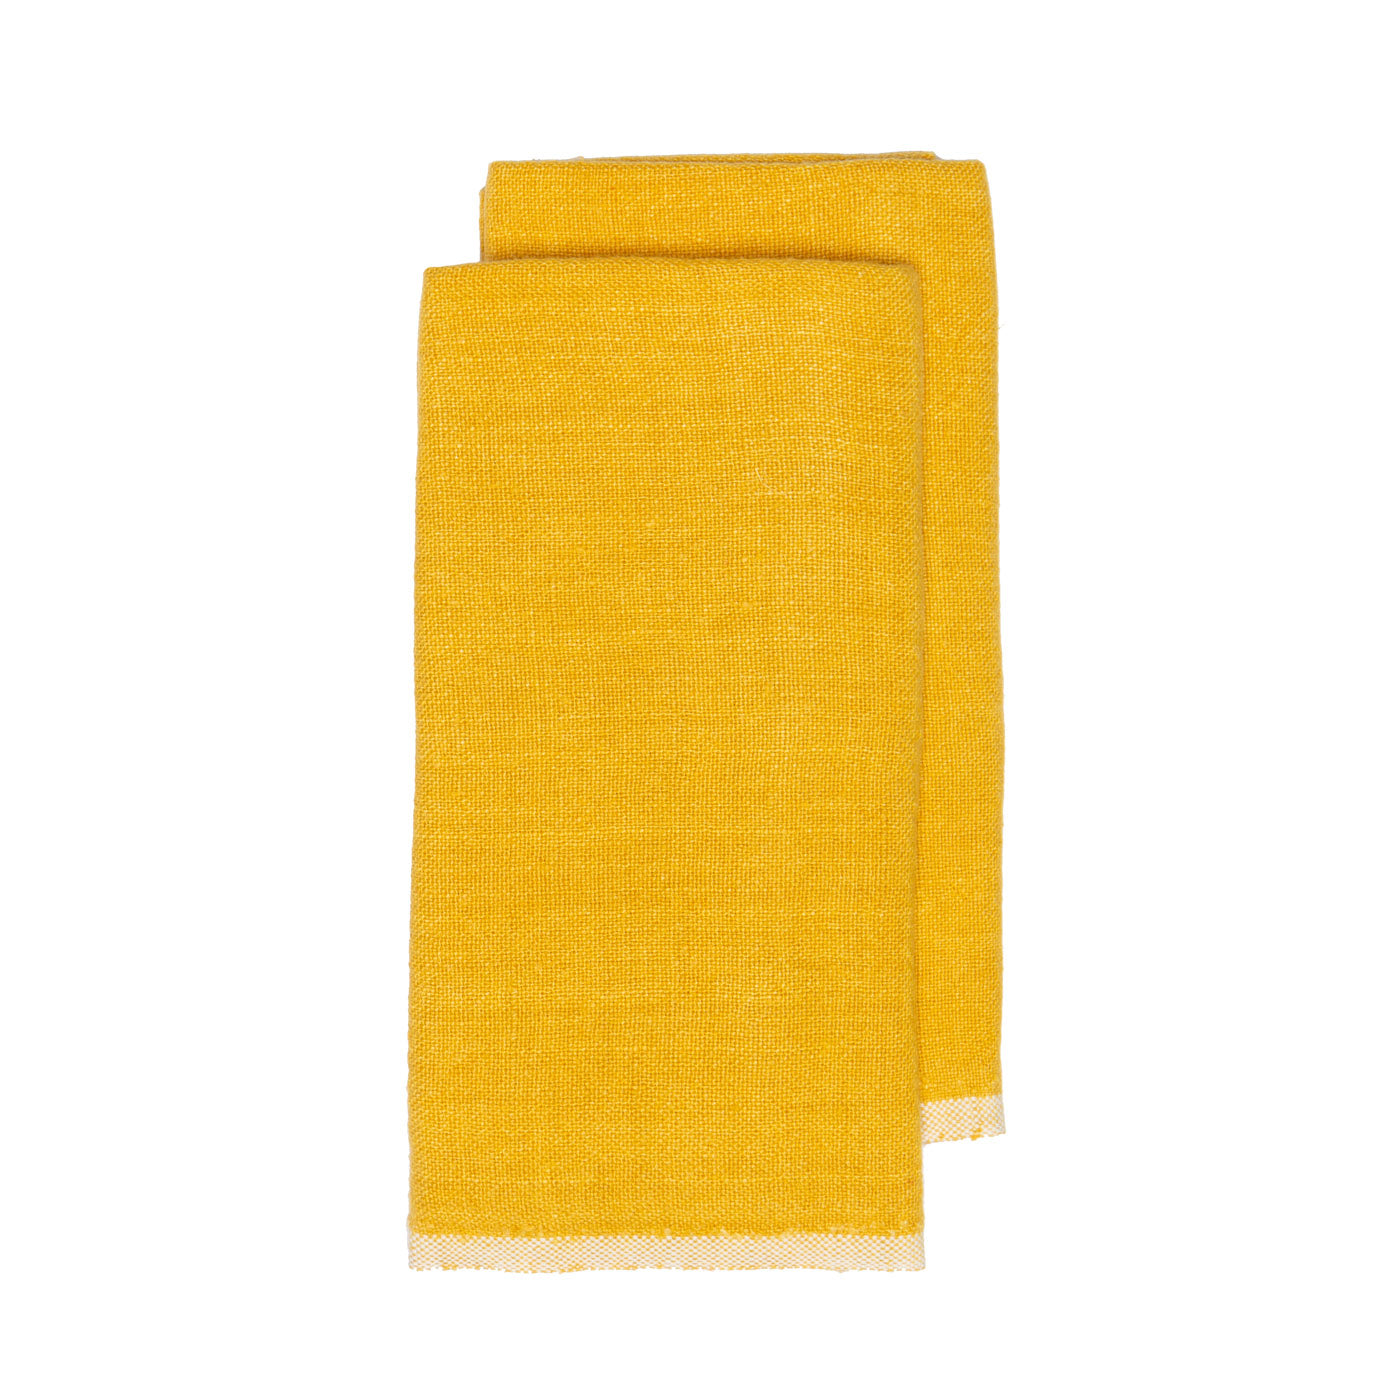 Chunky Linen Mustard Kitchen Towels, Set of 2